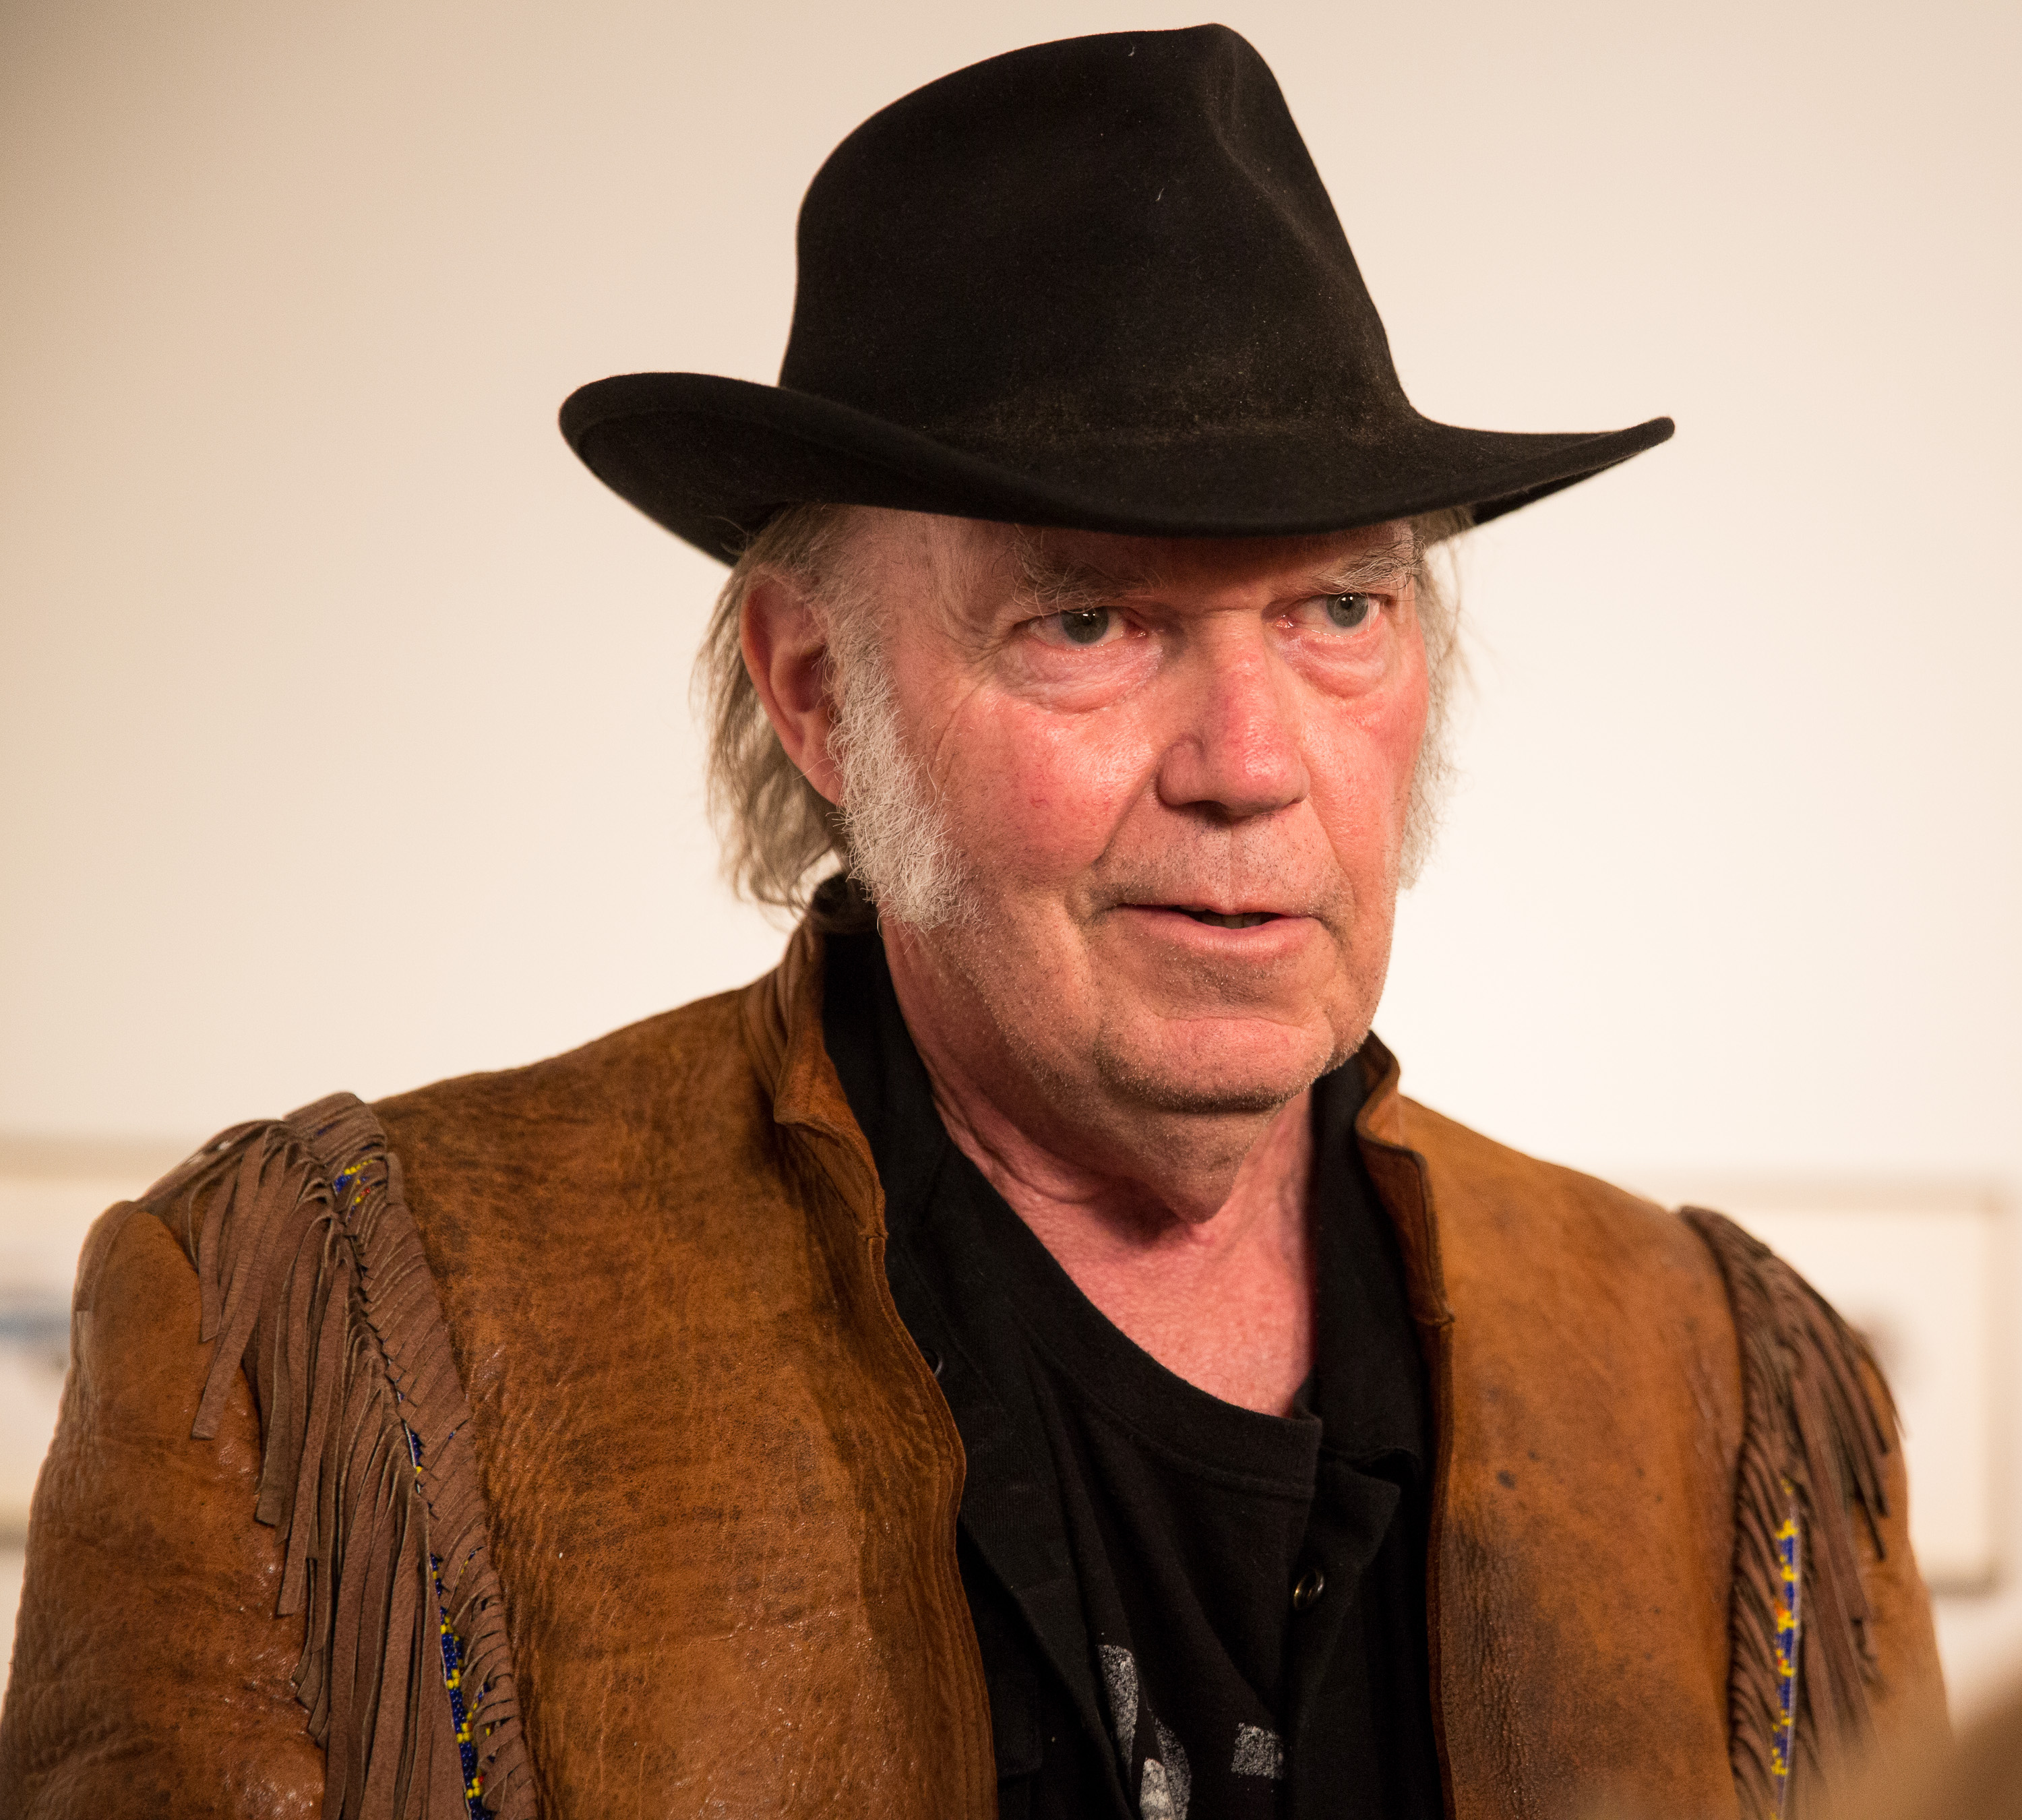 Neil Young Opening Night Reception For "Special Deluxe" Art Exhibition